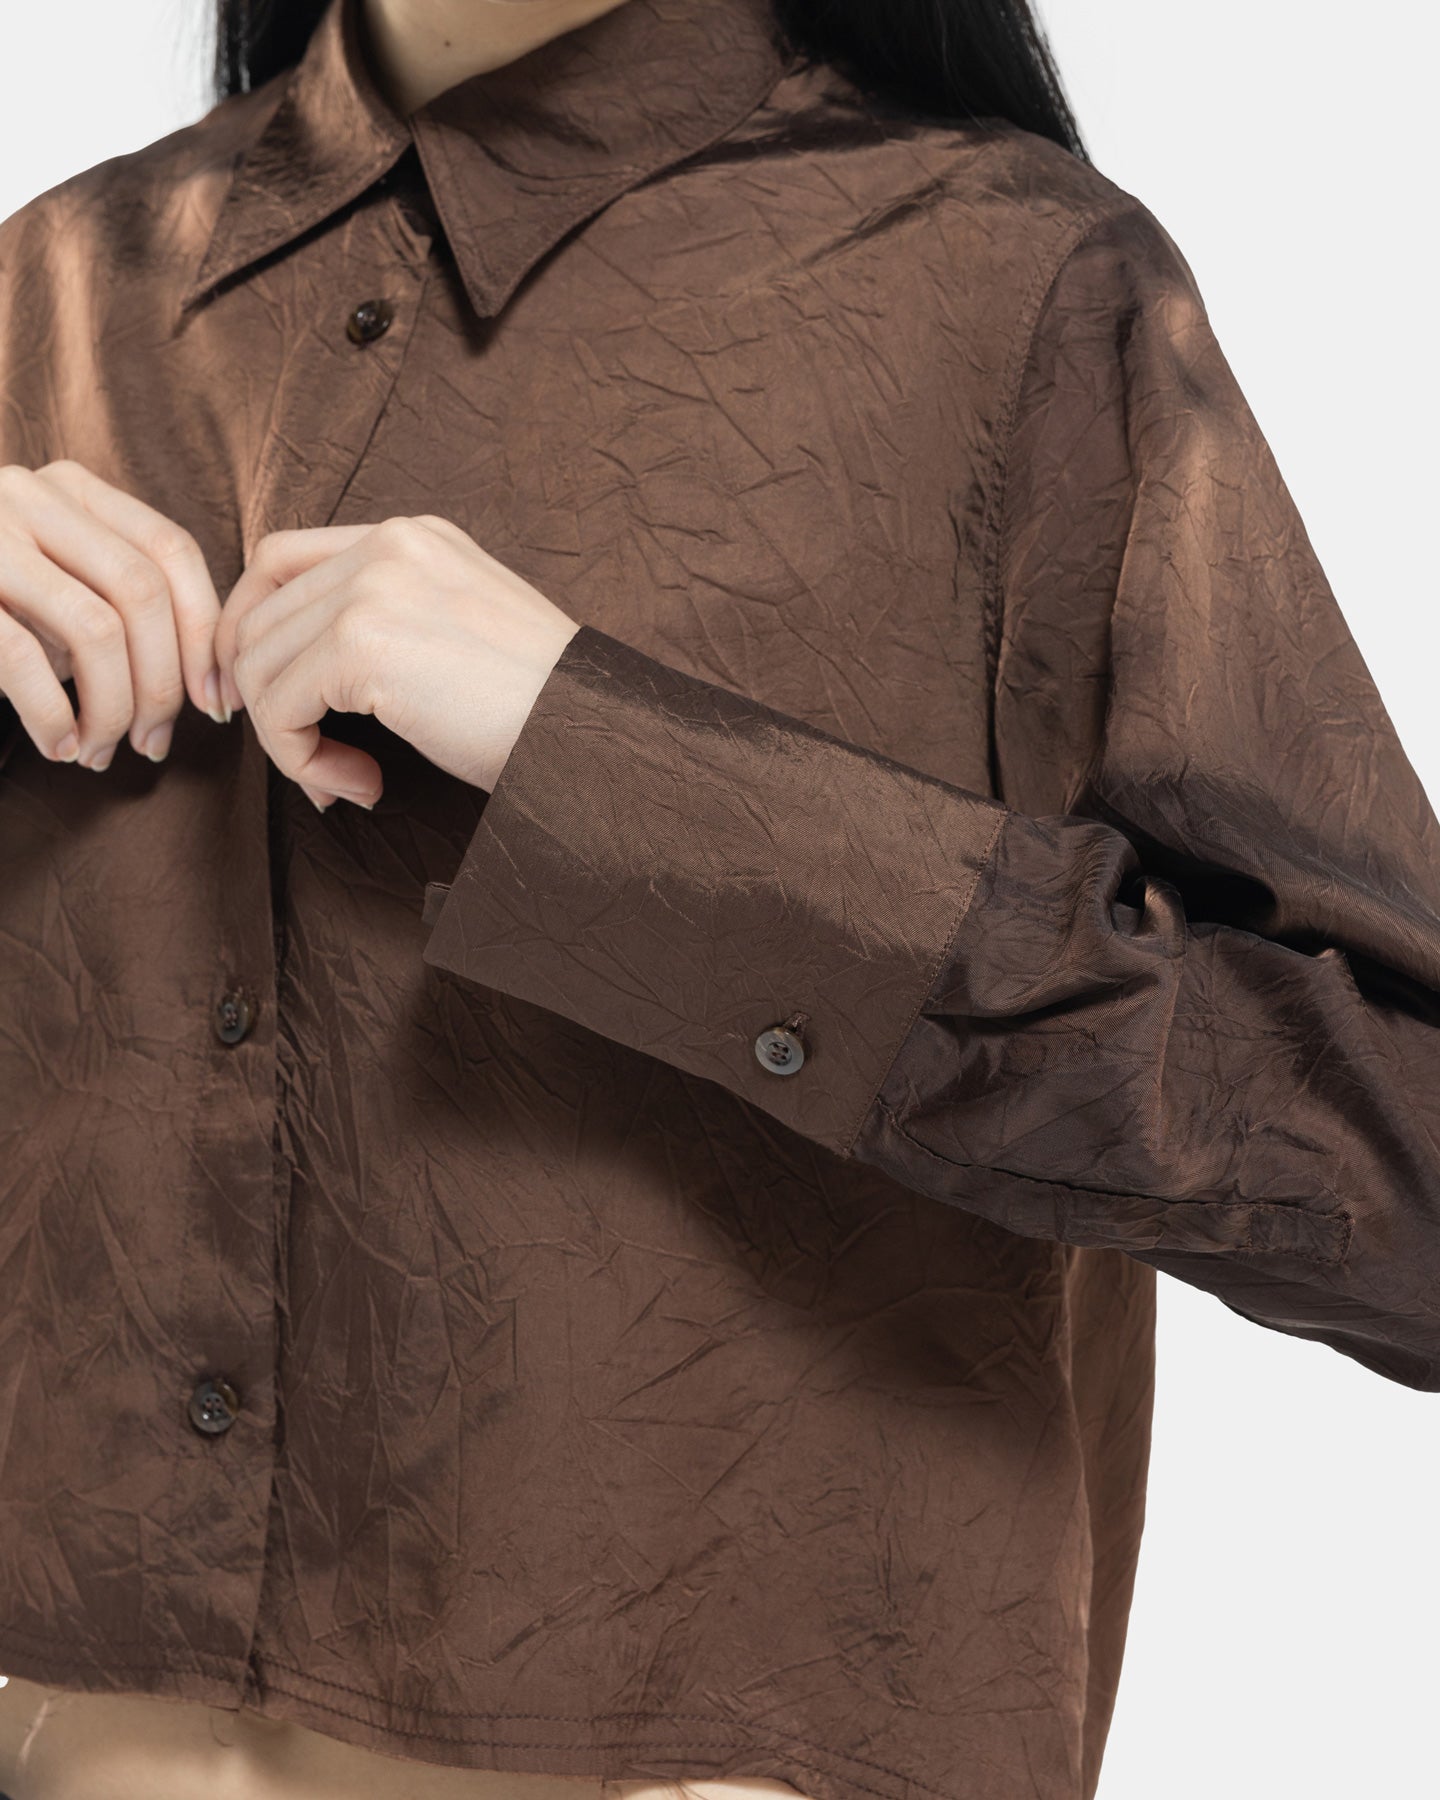 Brown Song For The Mute Shirt Model Buttoning on white background